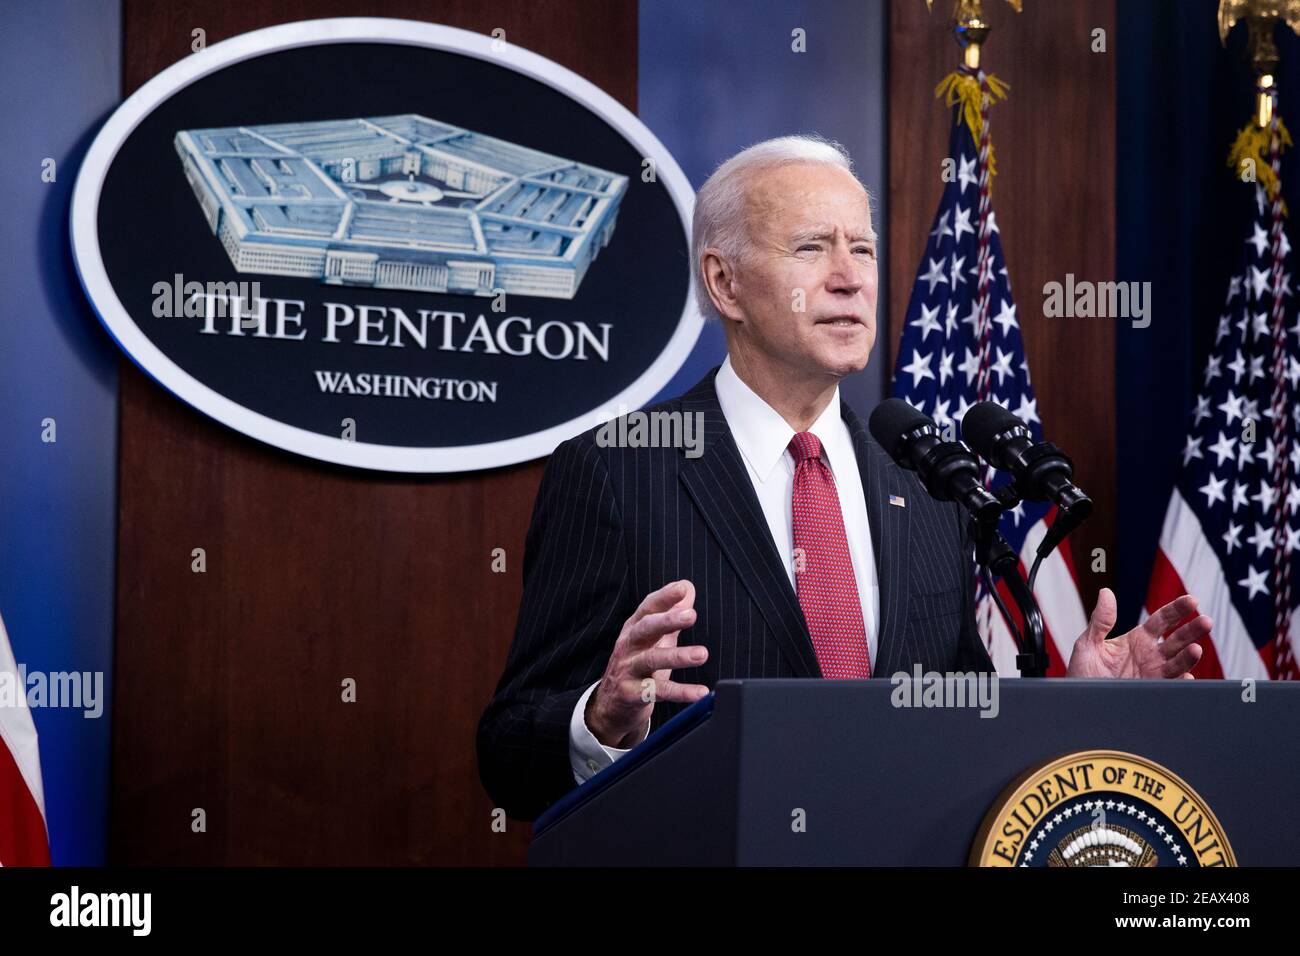 US President Joe Biden delivers remarks to Department of Defense, at the Pentagon in Arlington, Virginia, USA, 10 February 2021.Credit: Michael Reynolds/Pool via CNP /MediaPunch Stock Photo